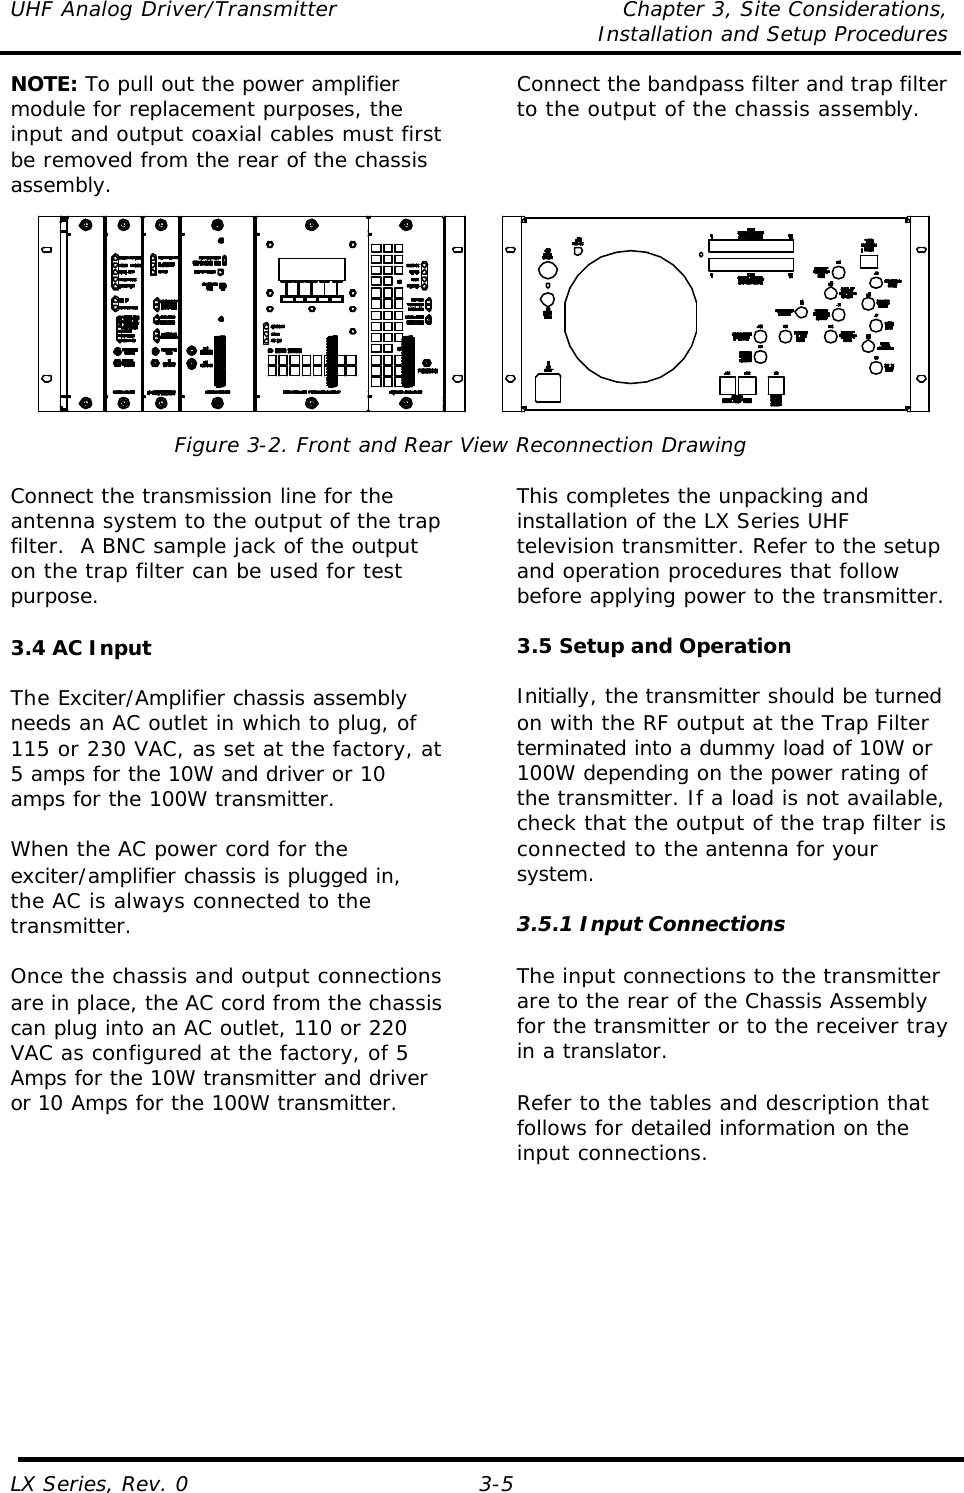 UHF Analog Driver/Transmitter Chapter 3, Site Considerations,   Installation and Setup Procedures LX Series, Rev. 0 3-5 NOTE: To pull out the power amplifier module for replacement purposes, the input and output coaxial cables must first be removed from the rear of the chassis assembly. Connect the bandpass filter and trap filter to the output of the chassis assembly.   Figure 3-2. Front and Rear View Reconnection Drawing  Connect the transmission line for the antenna system to the output of the trap filter.  A BNC sample jack of the output on the trap filter can be used for test purpose.  3.4 AC Input  The Exciter/Amplifier chassis assembly needs an AC outlet in which to plug, of 115 or 230 VAC, as set at the factory, at 5 amps for the 10W and driver or 10 amps for the 100W transmitter.  When the AC power cord for the exciter/amplifier chassis is plugged in, the AC is always connected to the transmitter.   Once the chassis and output connections are in place, the AC cord from the chassis can plug into an AC outlet, 110 or 220 VAC as configured at the factory, of 5 Amps for the 10W transmitter and driver or 10 Amps for the 100W transmitter.  This completes the unpacking and installation of the LX Series UHF television transmitter. Refer to the setup and operation procedures that follow before applying power to the transmitter.  3.5 Setup and Operation  Initially, the transmitter should be turned on with the RF output at the Trap Filter terminated into a dummy load of 10W or 100W depending on the power rating of the transmitter. If a load is not available, check that the output of the trap filter is connected to the antenna for your system.  3.5.1 Input Connections  The input connections to the transmitter are to the rear of the Chassis Assembly for the transmitter or to the receiver tray in a translator.  Refer to the tables and description that follows for detailed information on the input connections.  